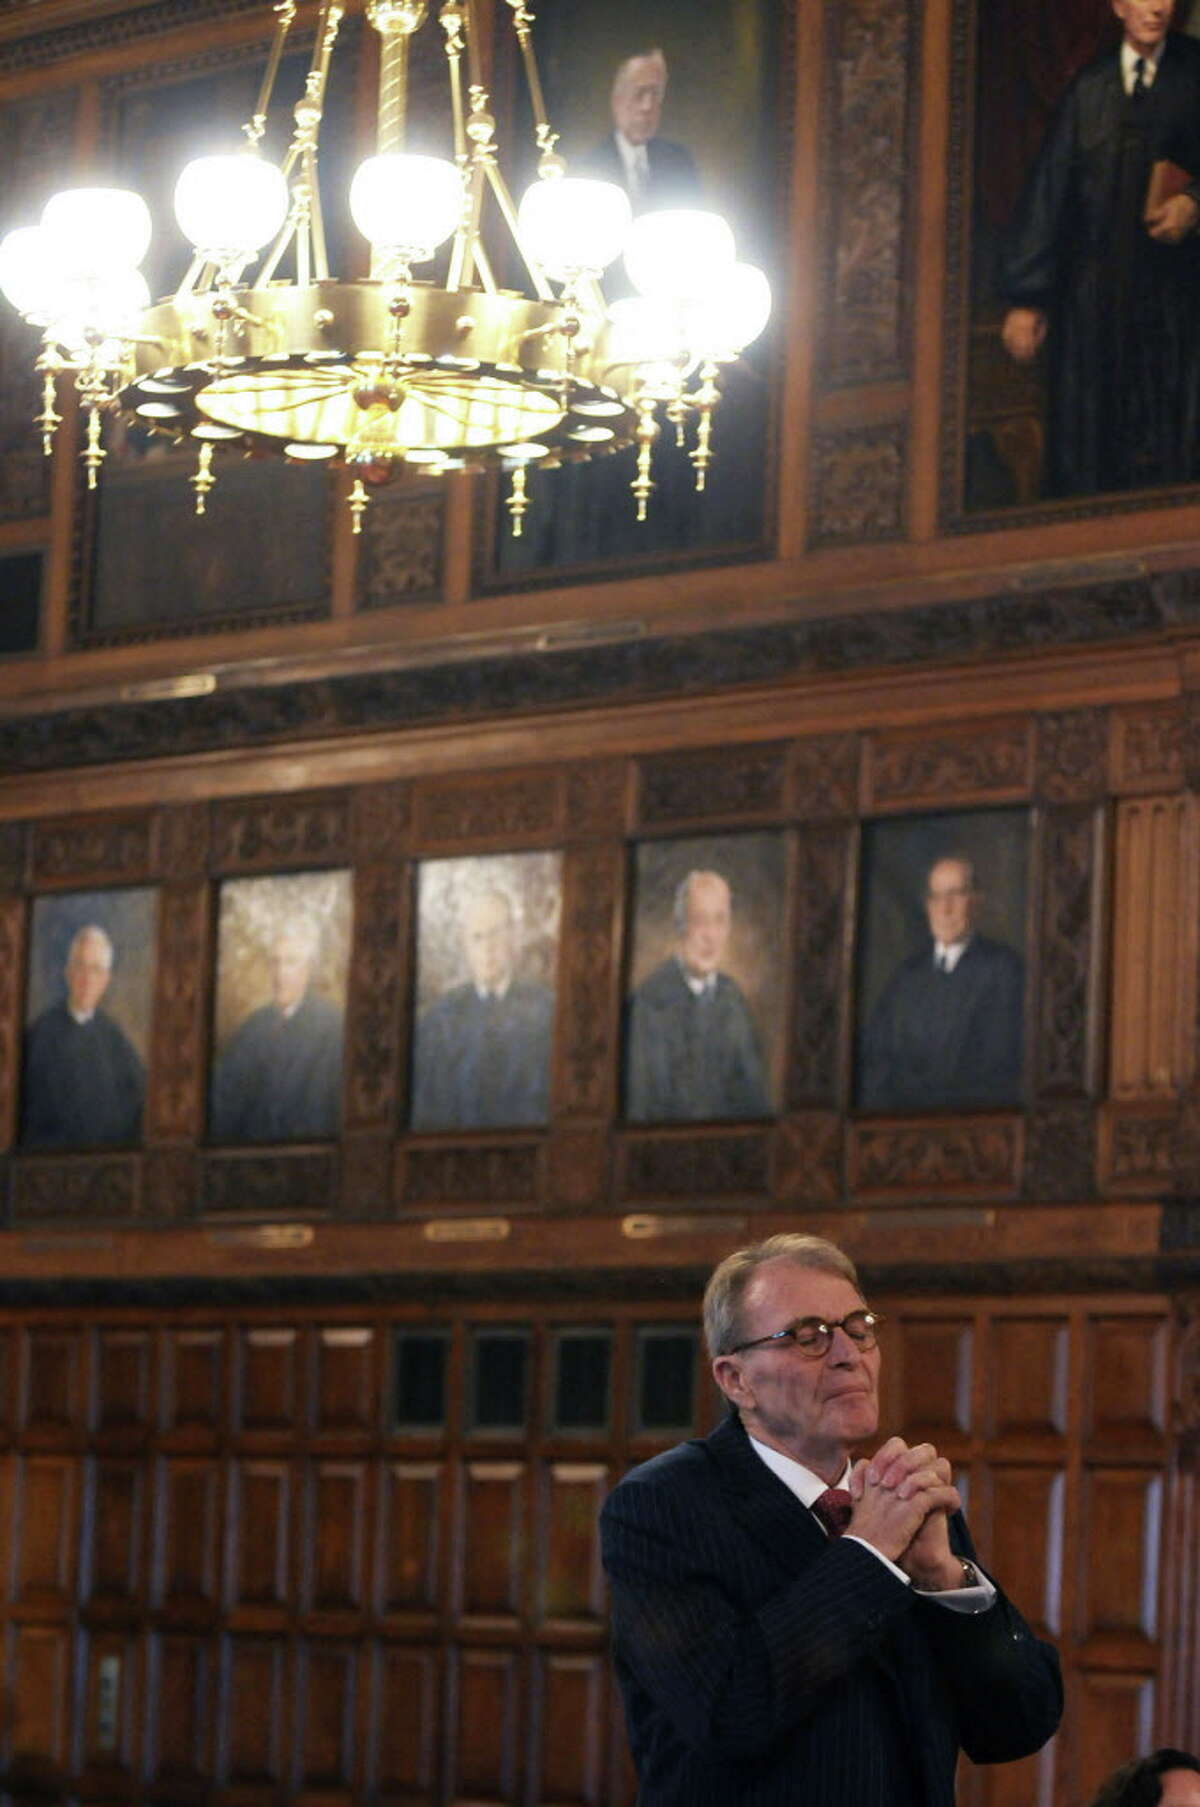 Defense attorney Terence L. Kindlon makes his case to the justices of the New York State Court of Appeals during the appeal of Christopher Porco's murder and attempted murder conviction, on Tuesday Sept. 13, 2011 in Albany, NY.( Philip Kamrass / Times Union)